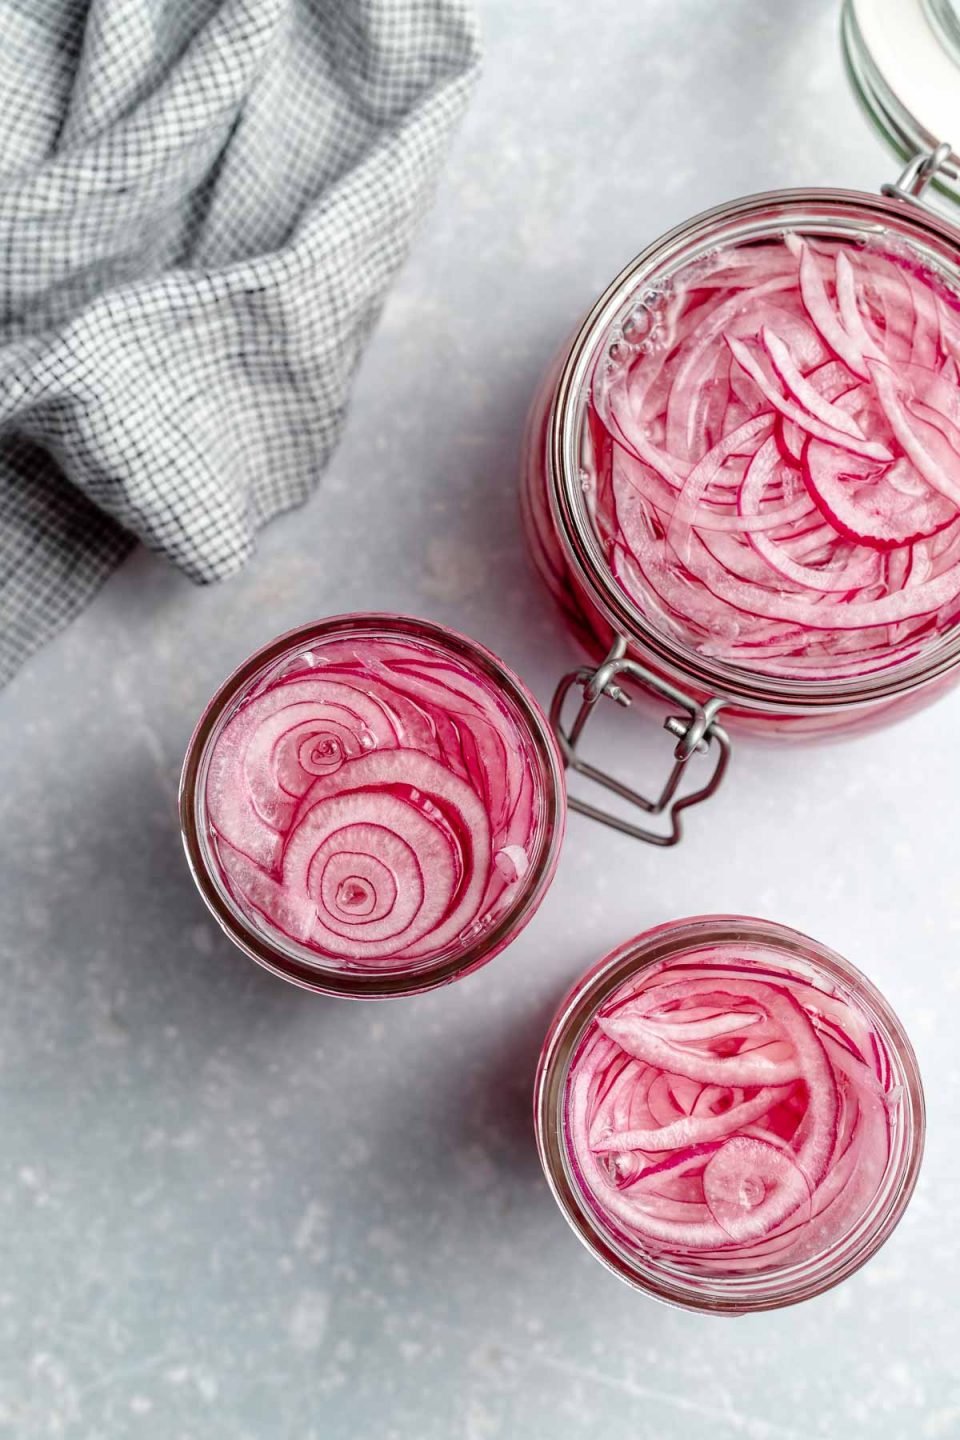 An overhead shot of three open jars of quick pickled red onions on a light blue surface. There is a light blue linen napkin in the upper left hand corner.